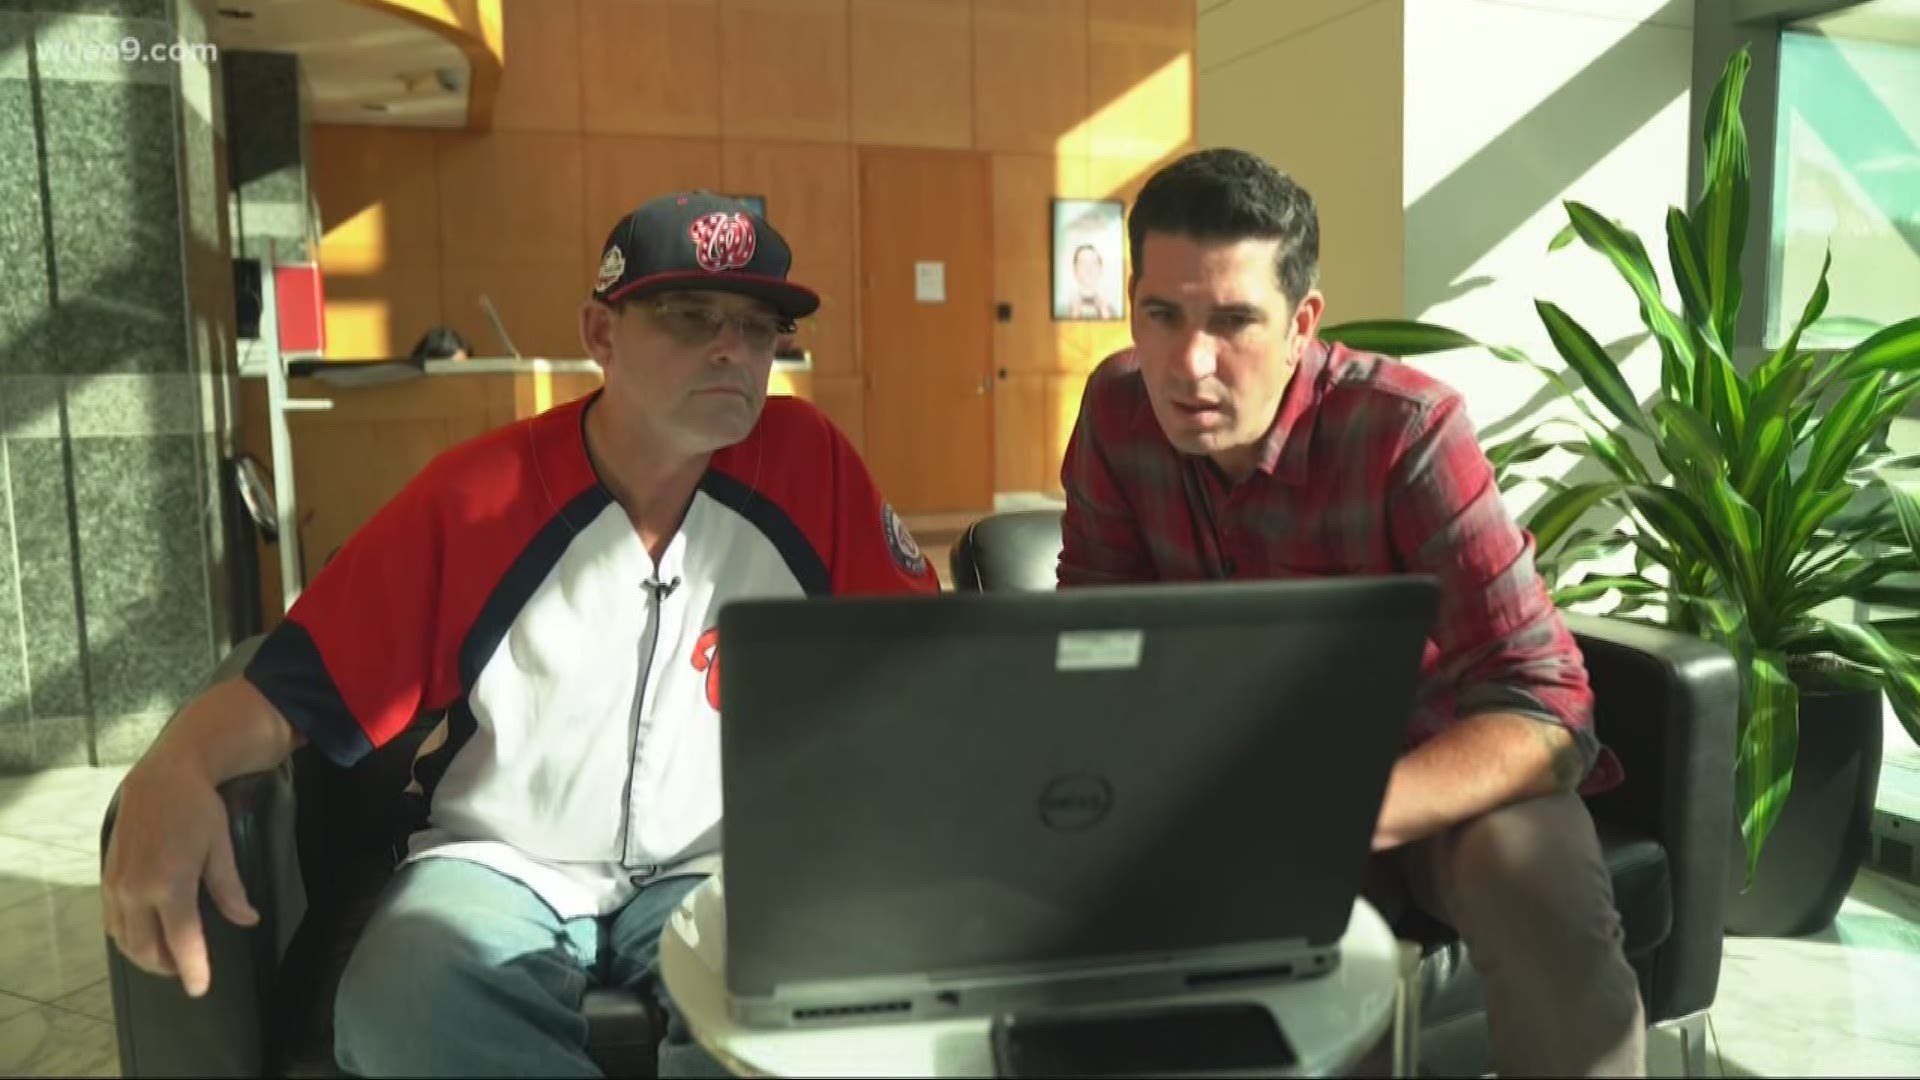 Man tries to buy Nationals World Series tickets for 2 hours | www.paulmartinsmith.com